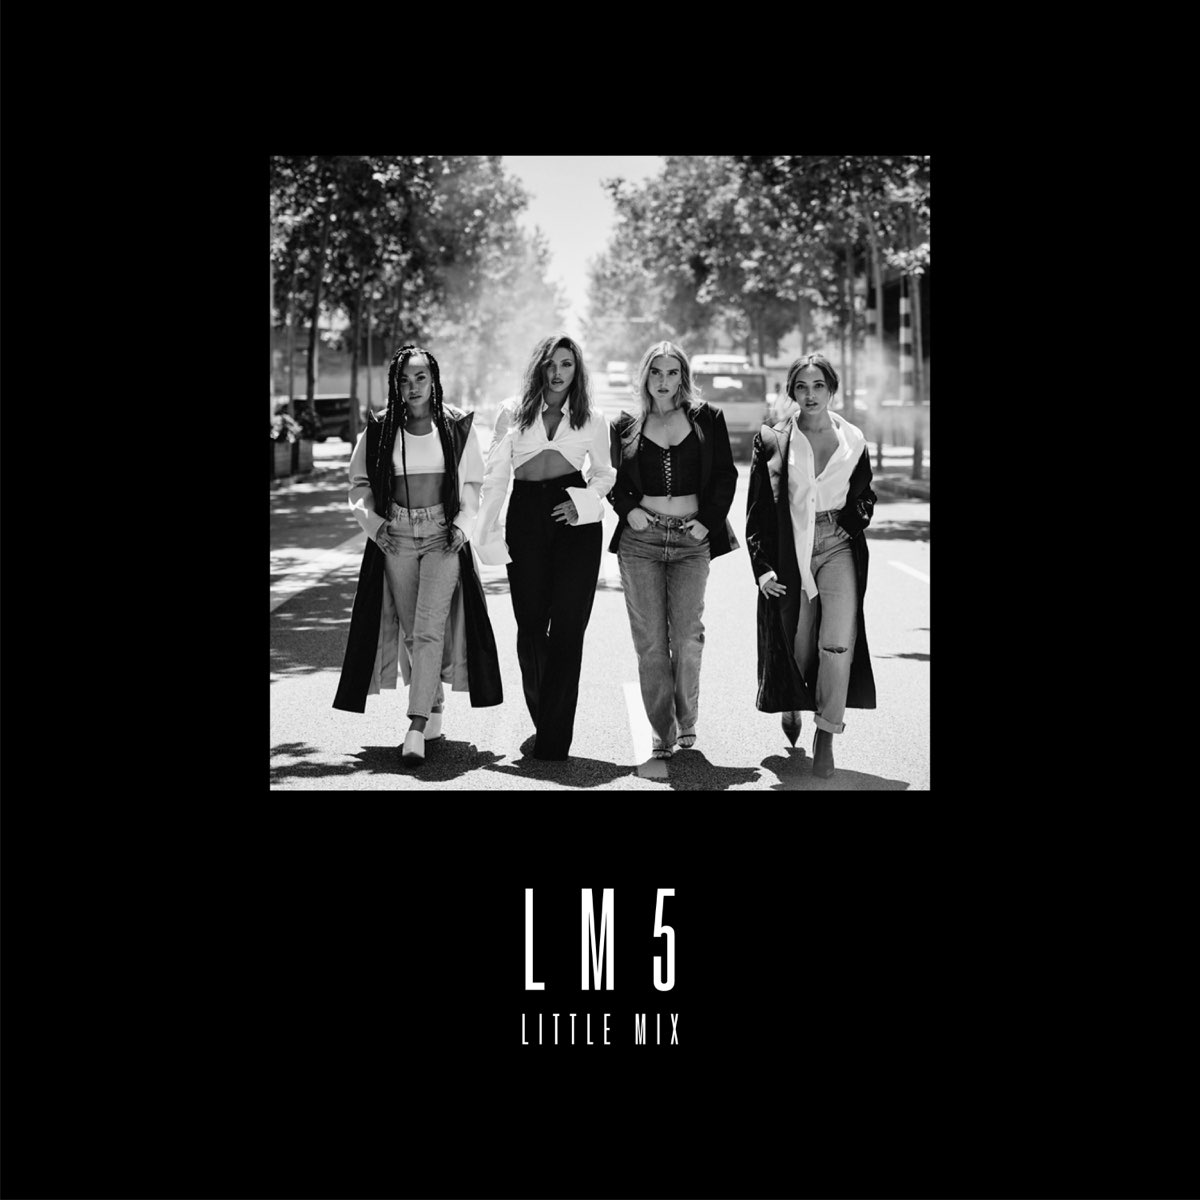 ‎apple Music 上little Mix的专辑《lm5 Deluxe》